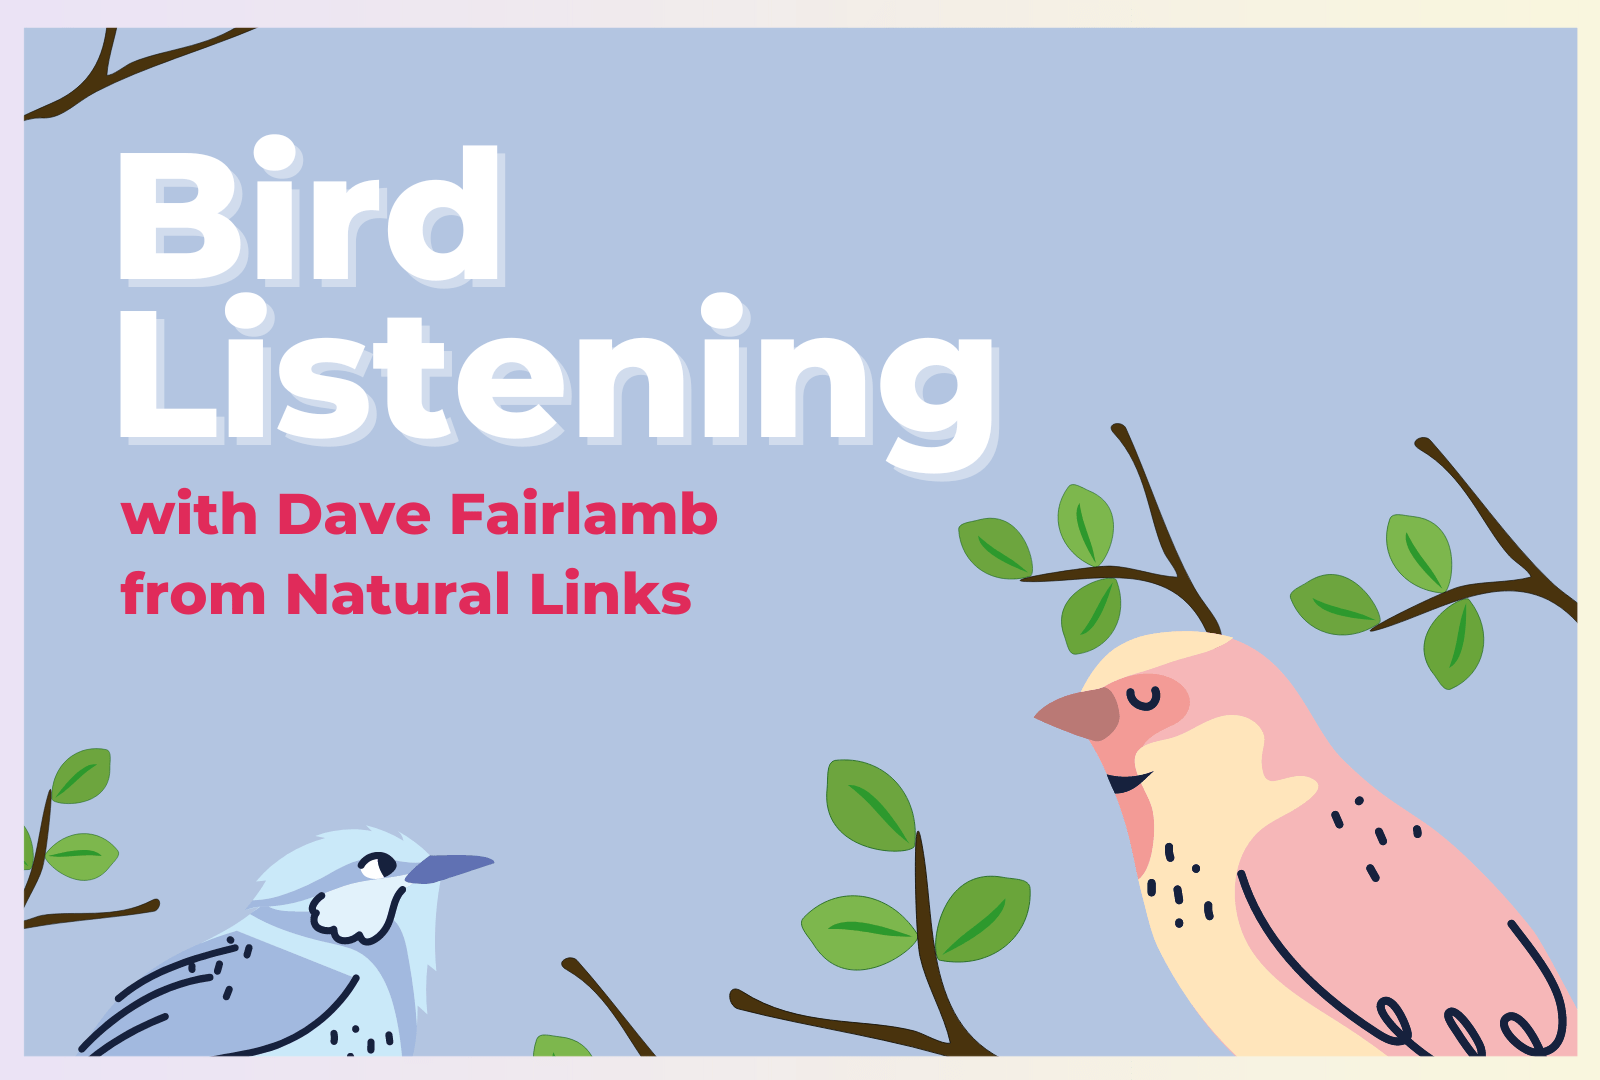 Cartoon Birds with the words 'Bird Listening with Dave Fairlamb of Natural Links' overlaid.